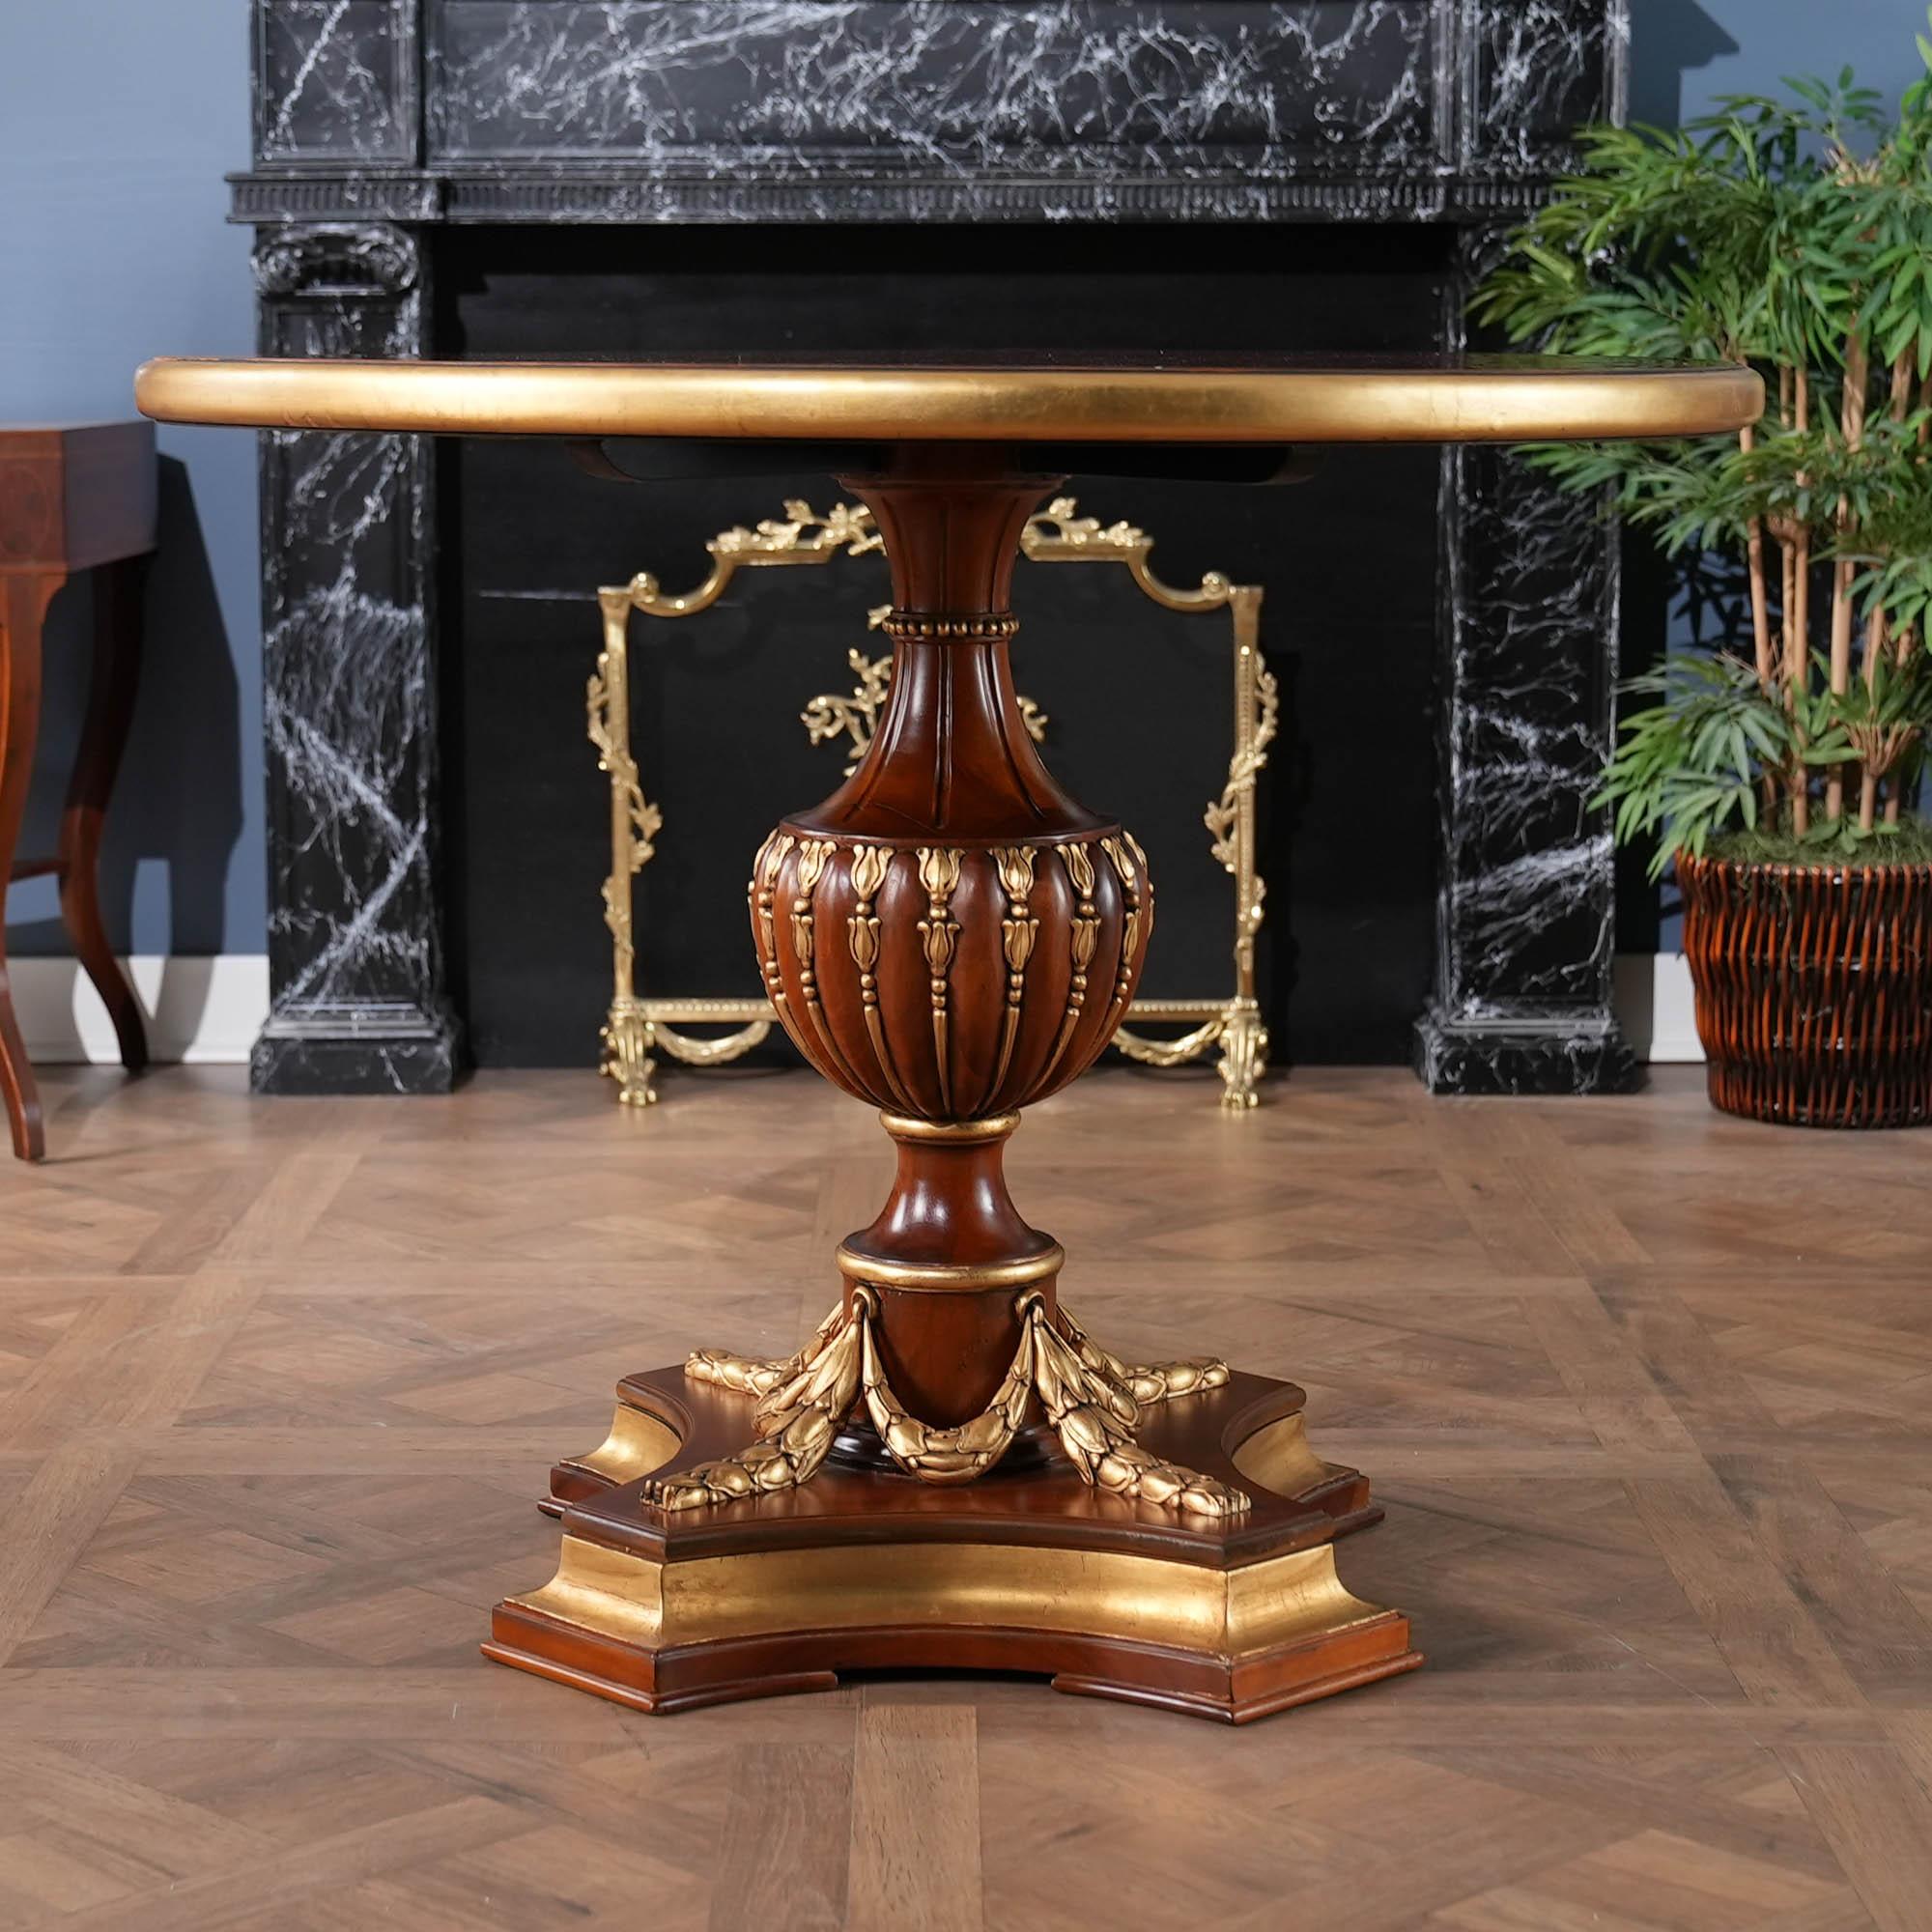 A gorgeous, high quality Burled Center Table  from Niagara Furniture with plenty of presence to brighten up any room. Banded and burled top, hand carved solid mahogany base and real gold leaf accents all work together to create a table that could be